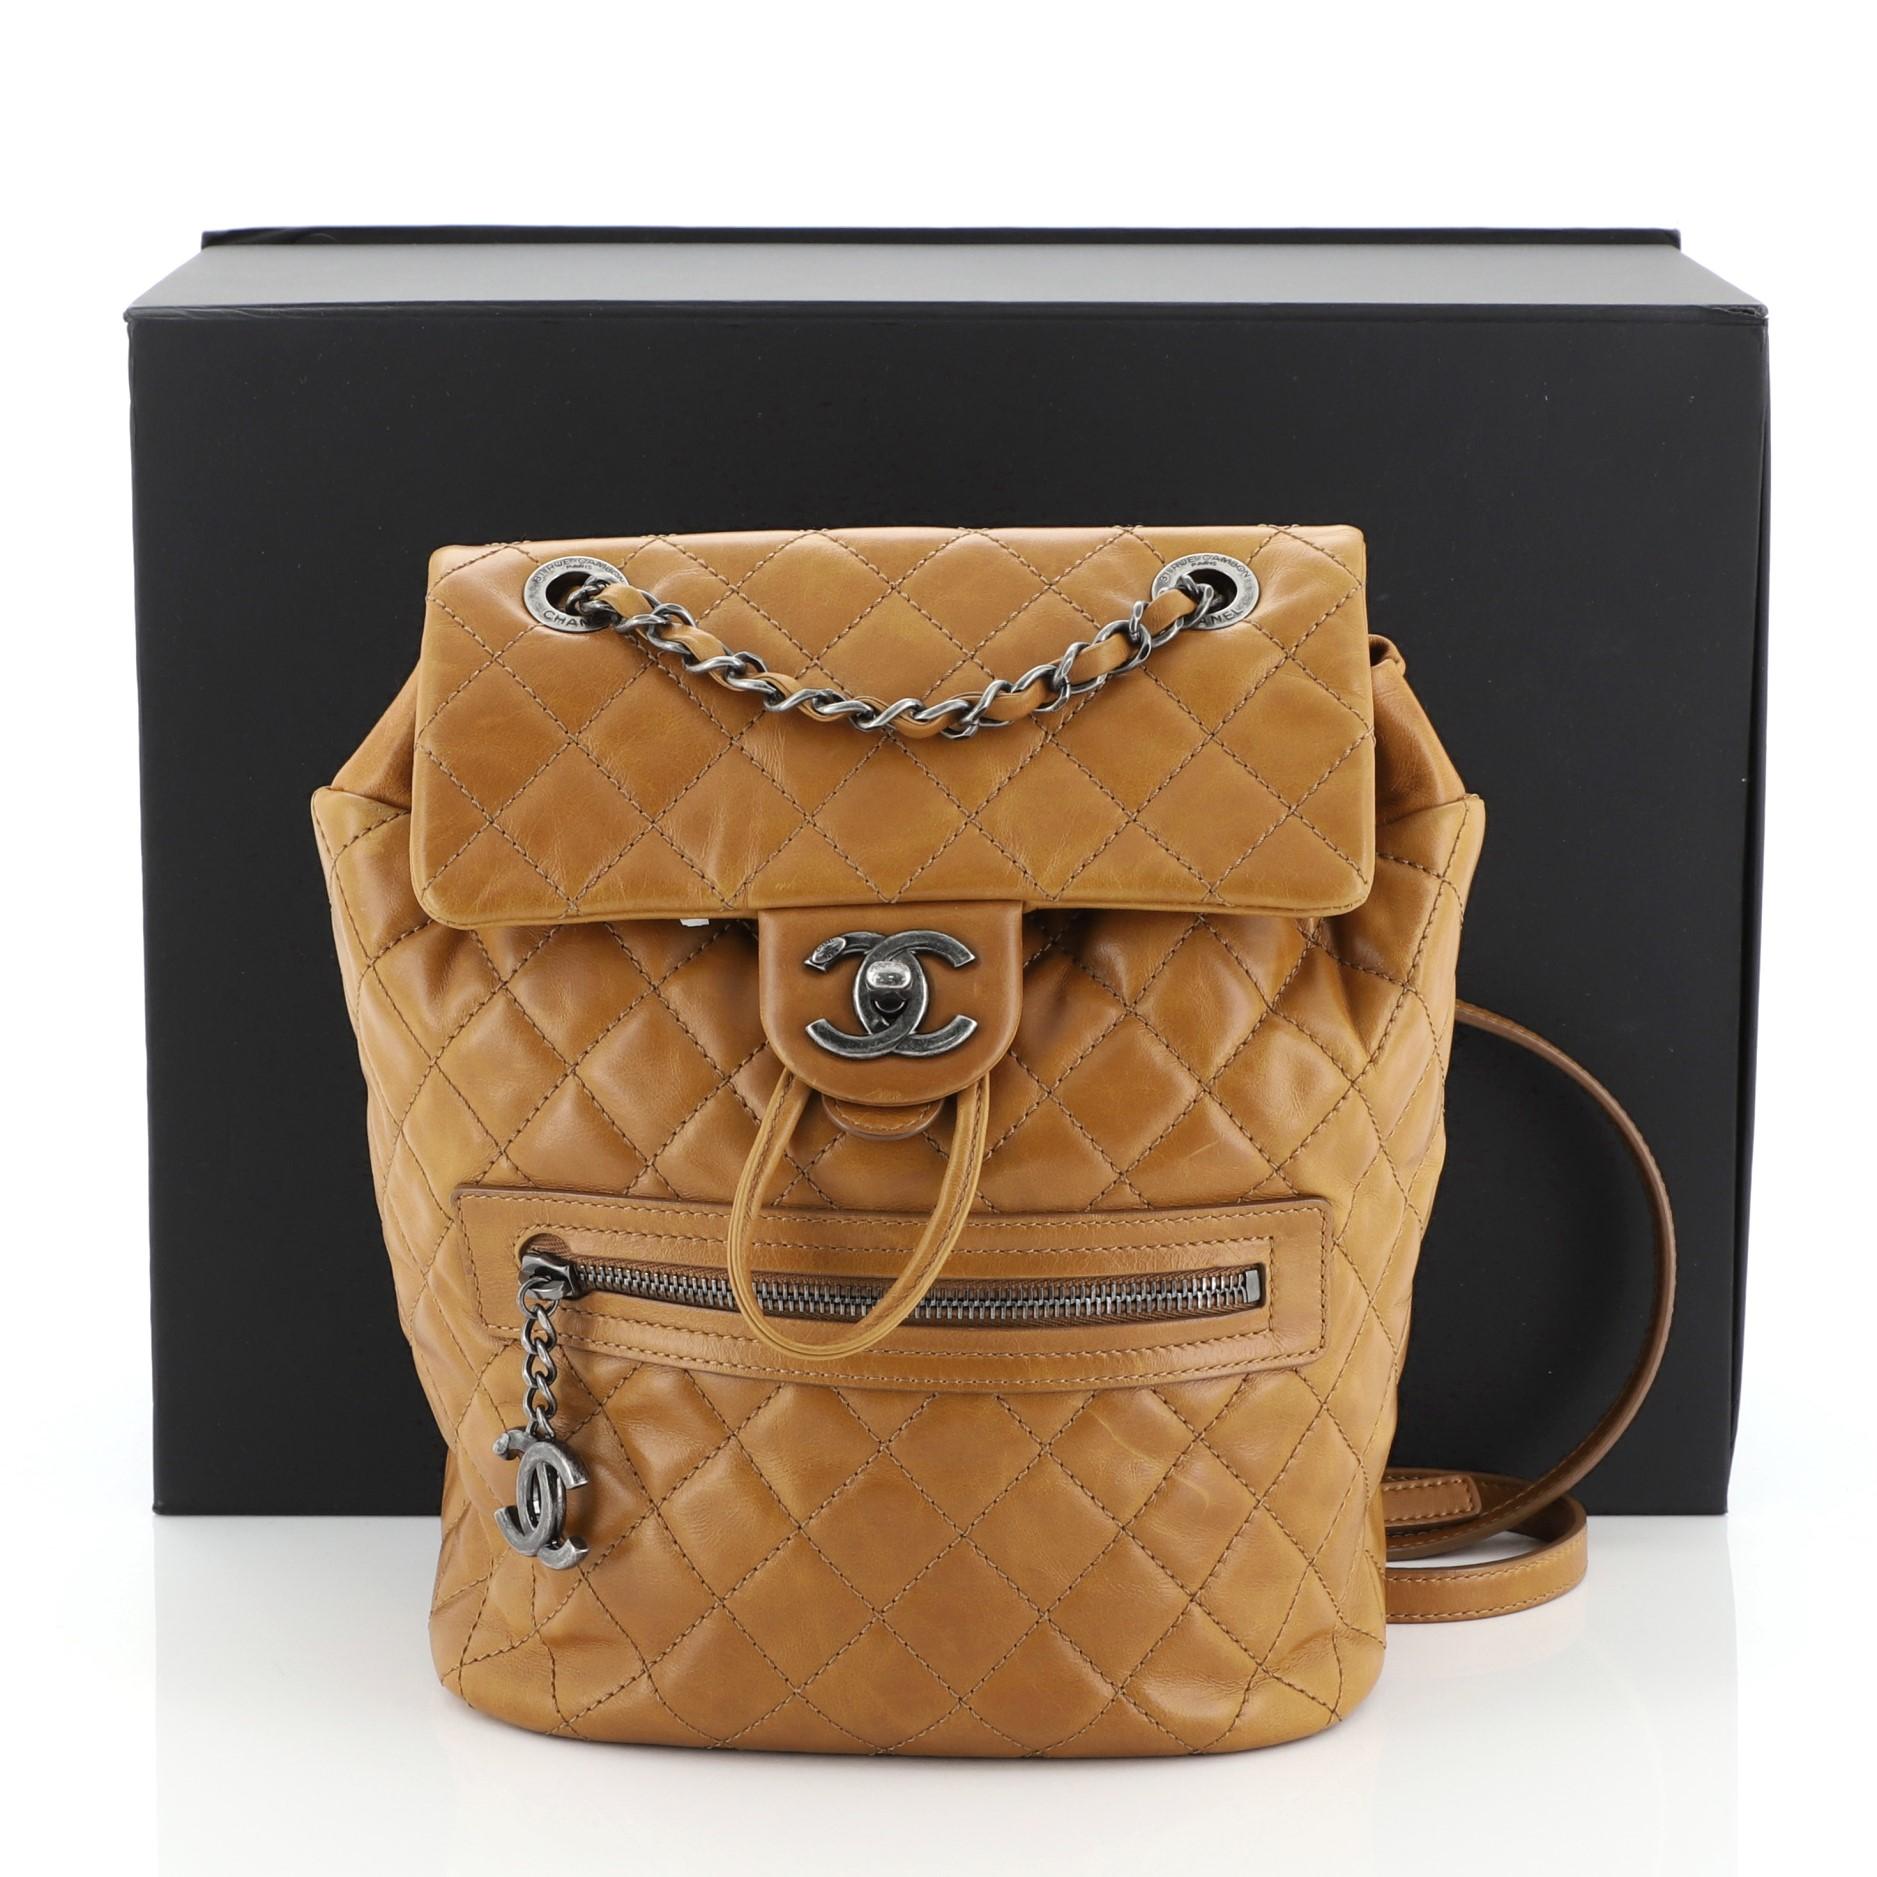 This Chanel Mountain Backpack Quilted Glazed Calfskin Small, crafted from yellow quilted glazed calfskin, features woven-in leather chain top handle, flat leather backpack straps, exterior front pocket with edelweiss CC logo zipper, and aged